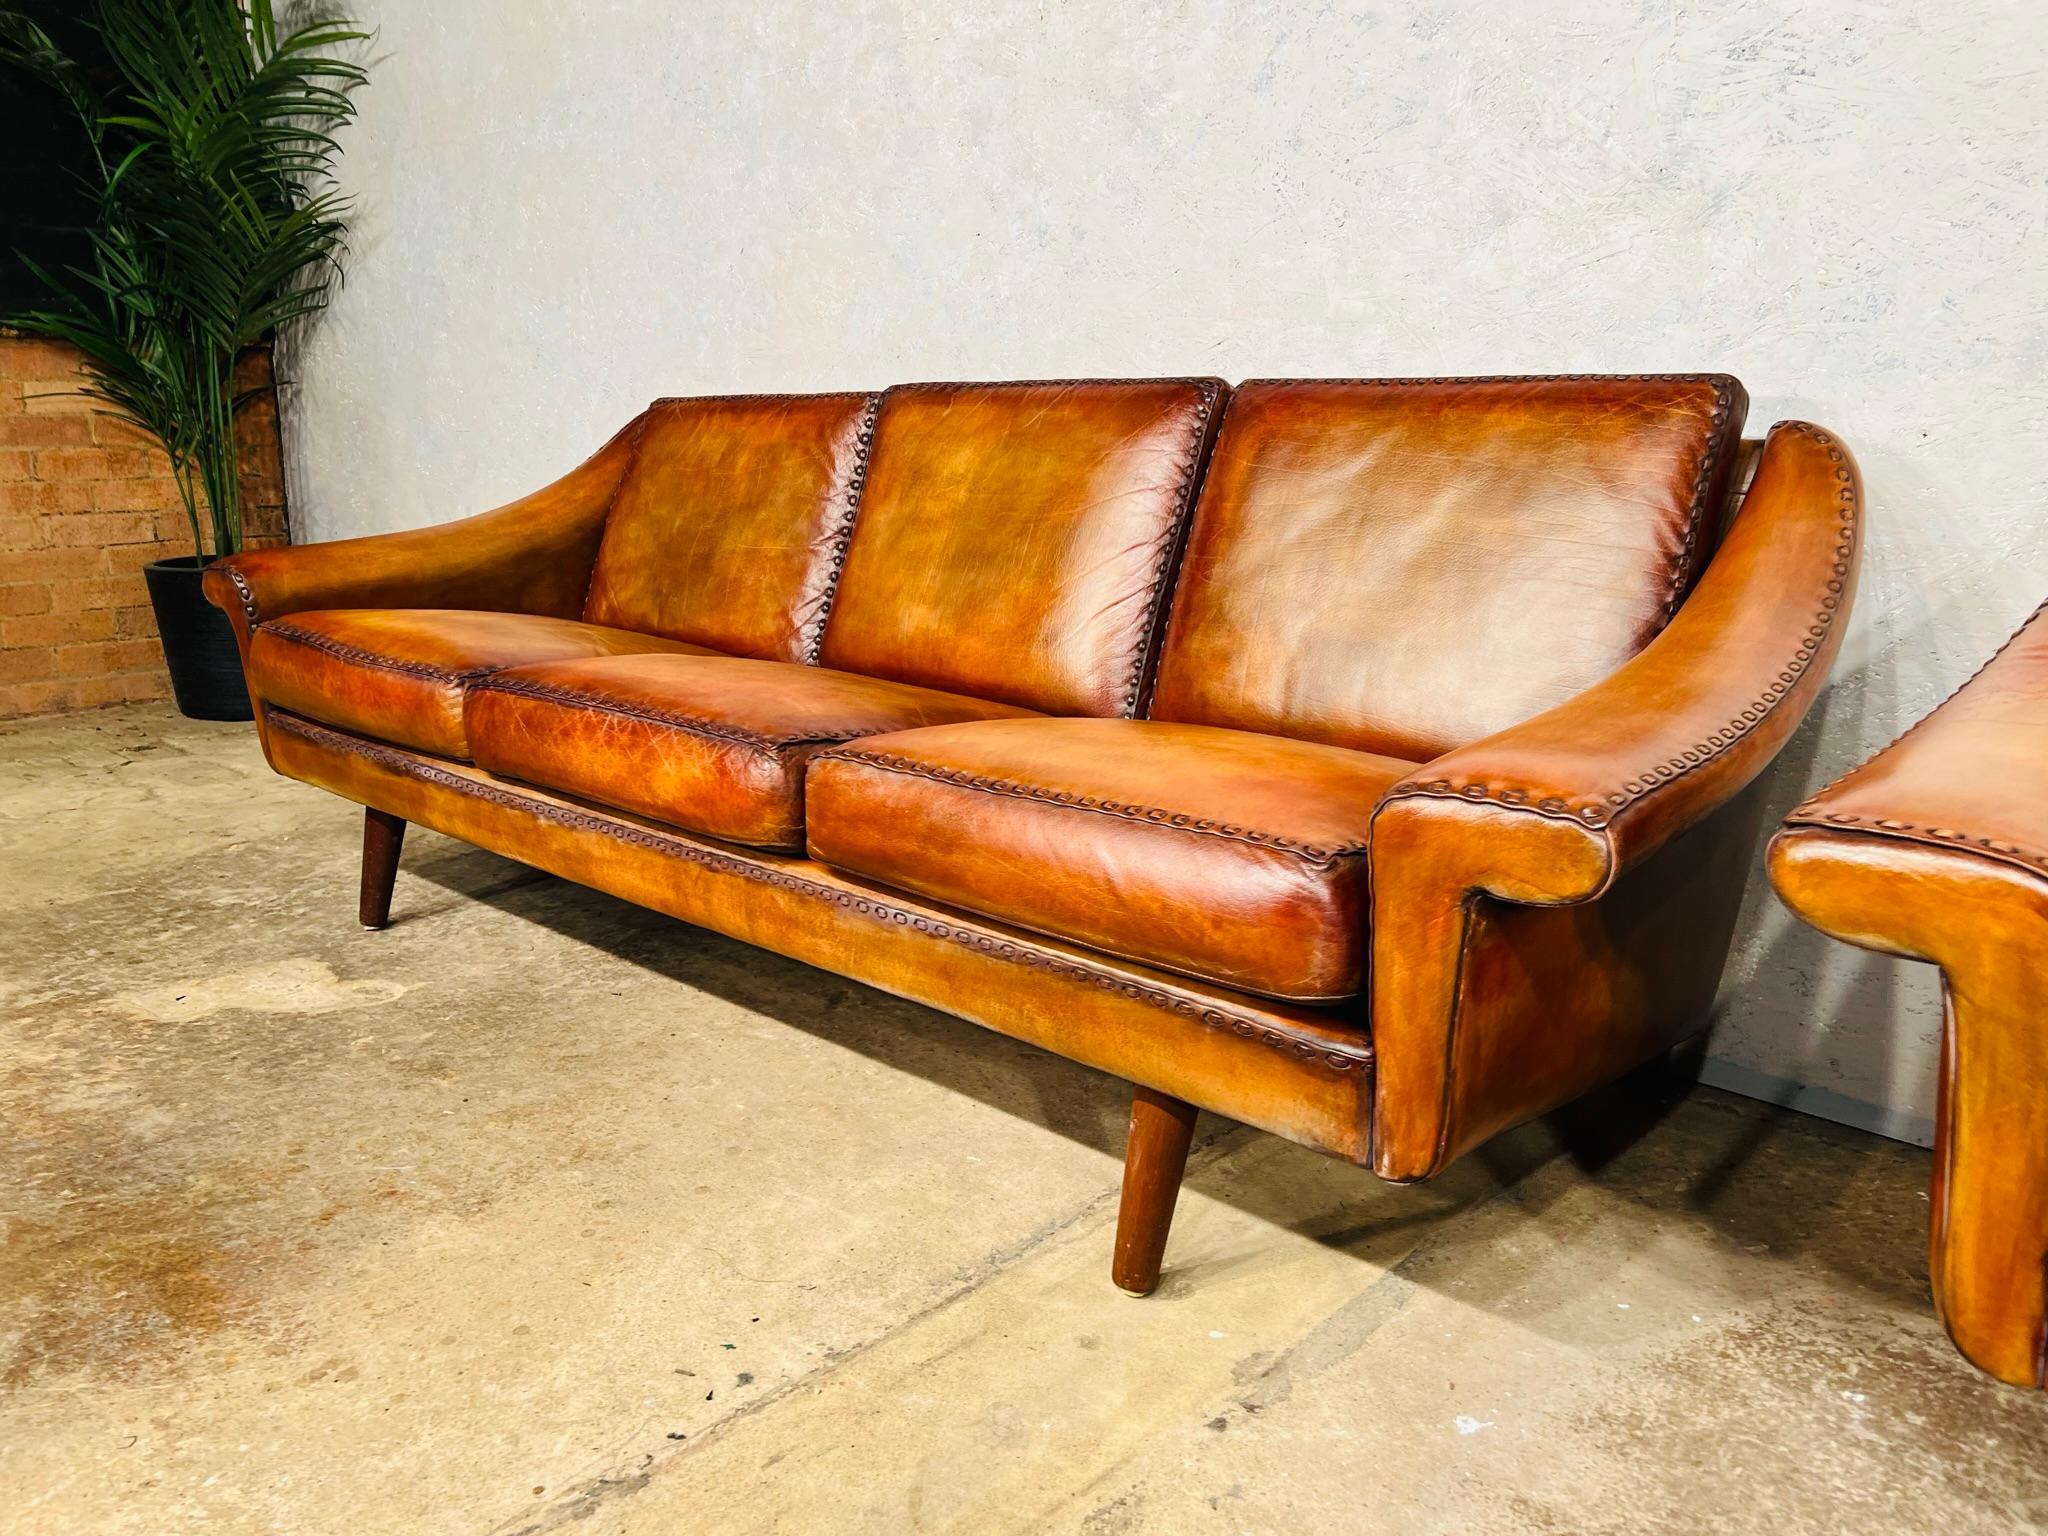 Pair Of Matador Leather 3 Seater Sofa by Aage Christiansen for Eran 1960s #642 For Sale 9